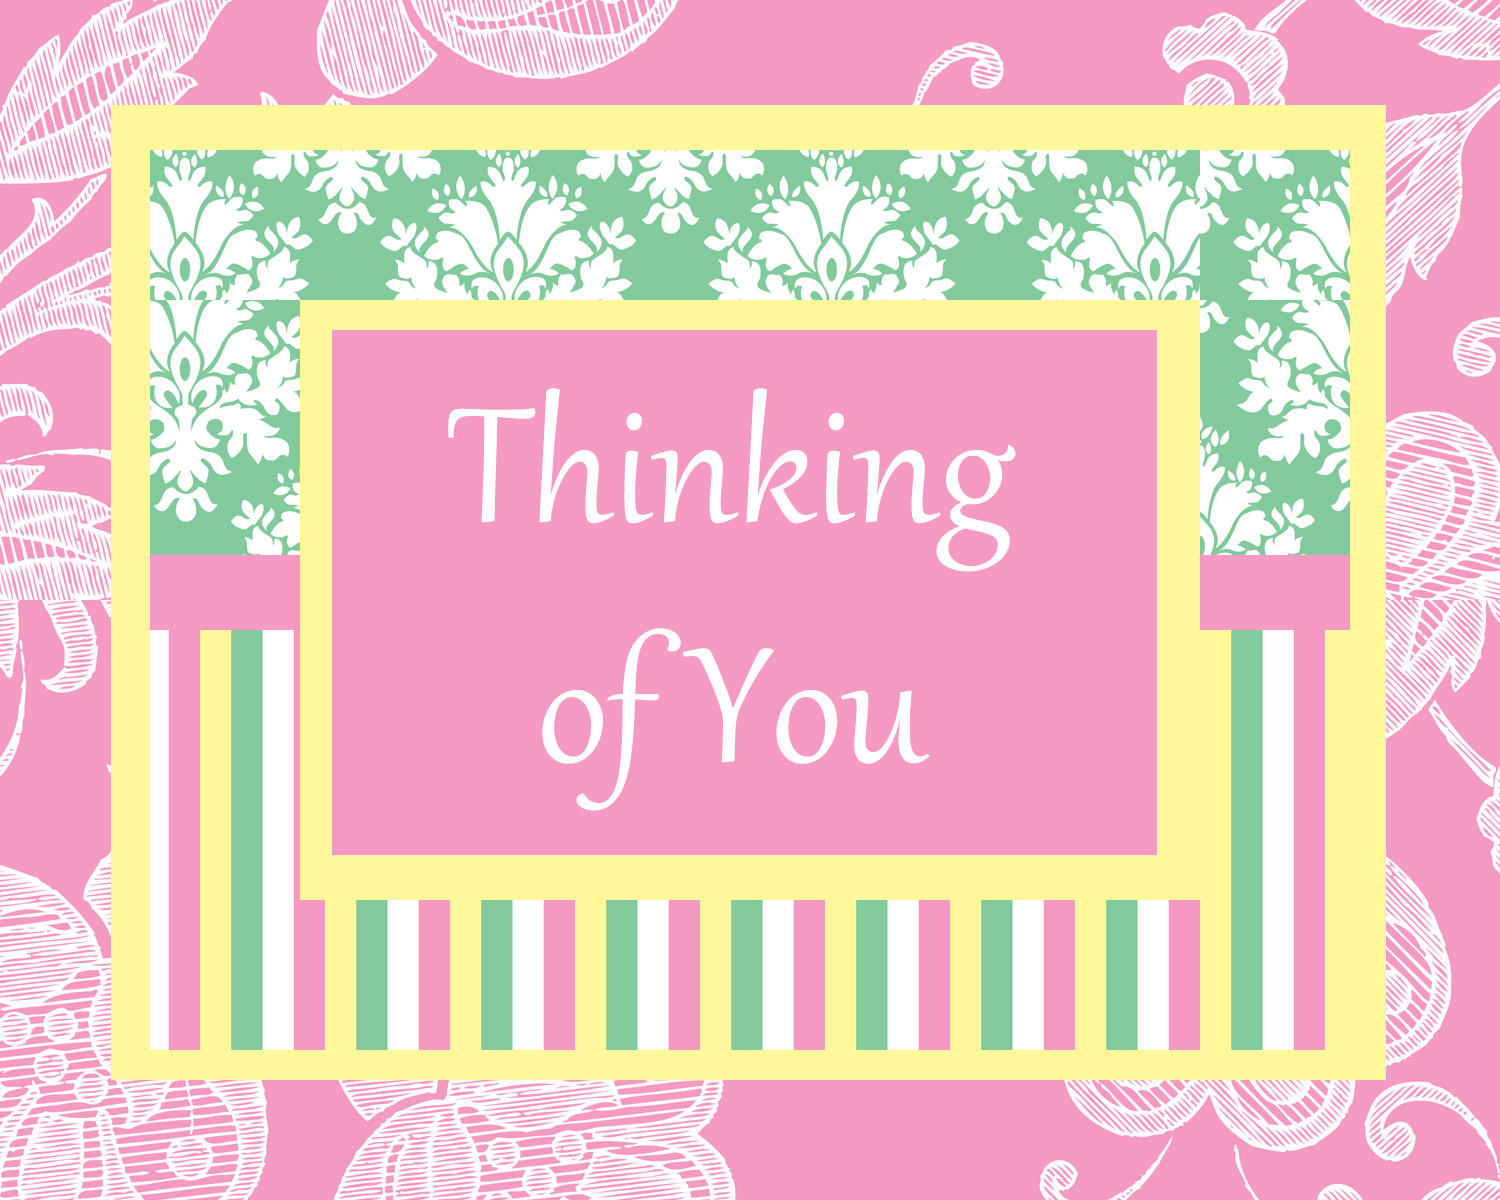 a-thinking-of-you-ecard-for-someone-free-thinking-of-you-ecards-123